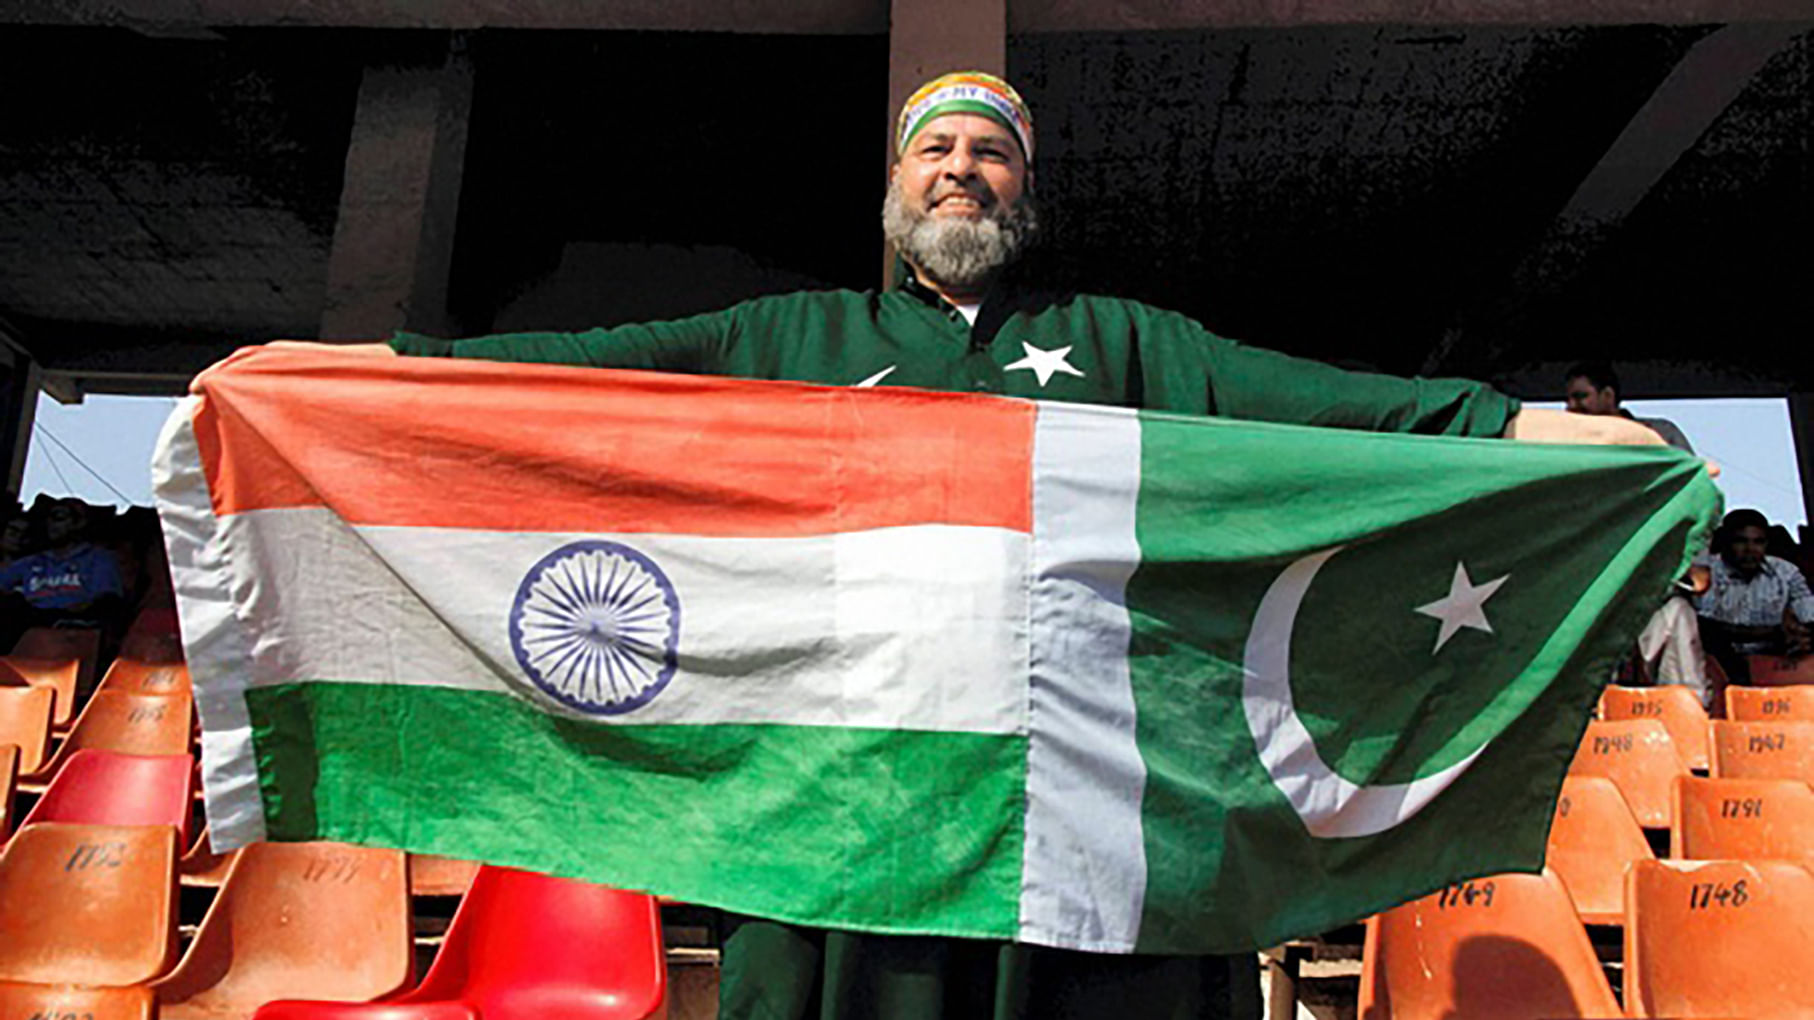 Mohammad Bashir a cricket fan displays flags of both India
and Pakistan during a T20 cricket match between India and Pakistan in Ahmedabad. (Photo: PTI)